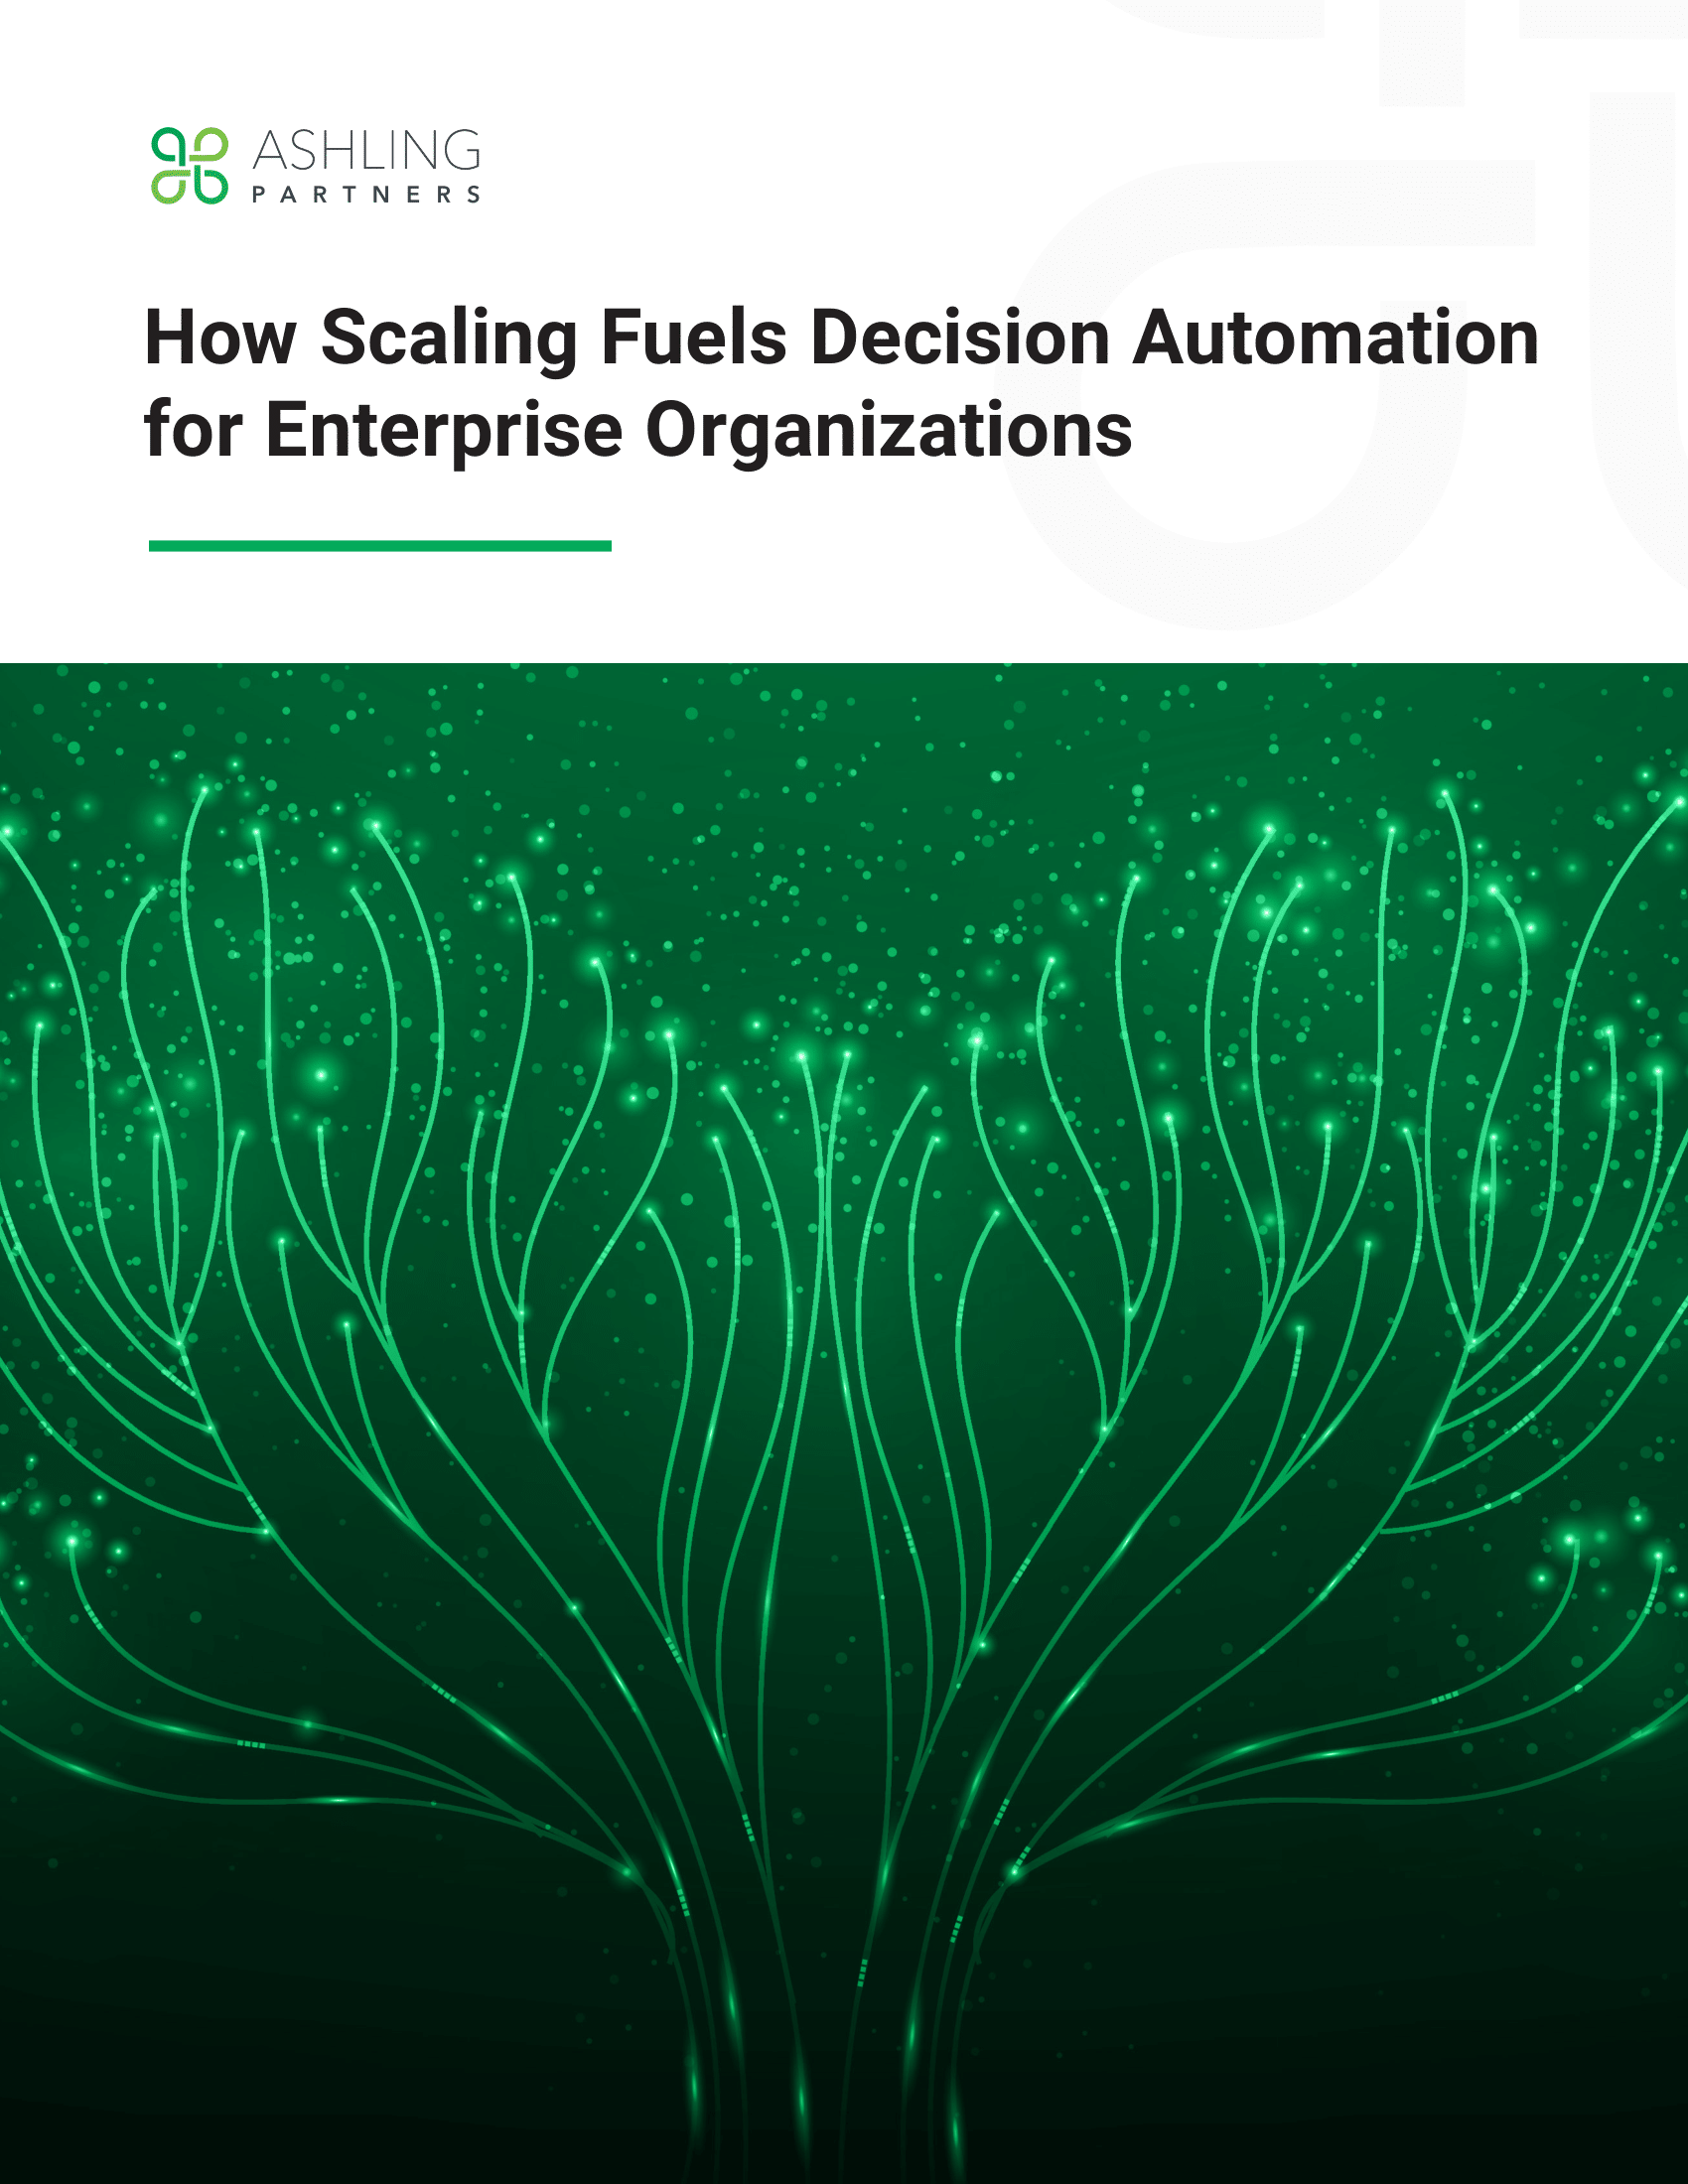 How Scaling Fuels Decision Automation for Enterprise Organizations